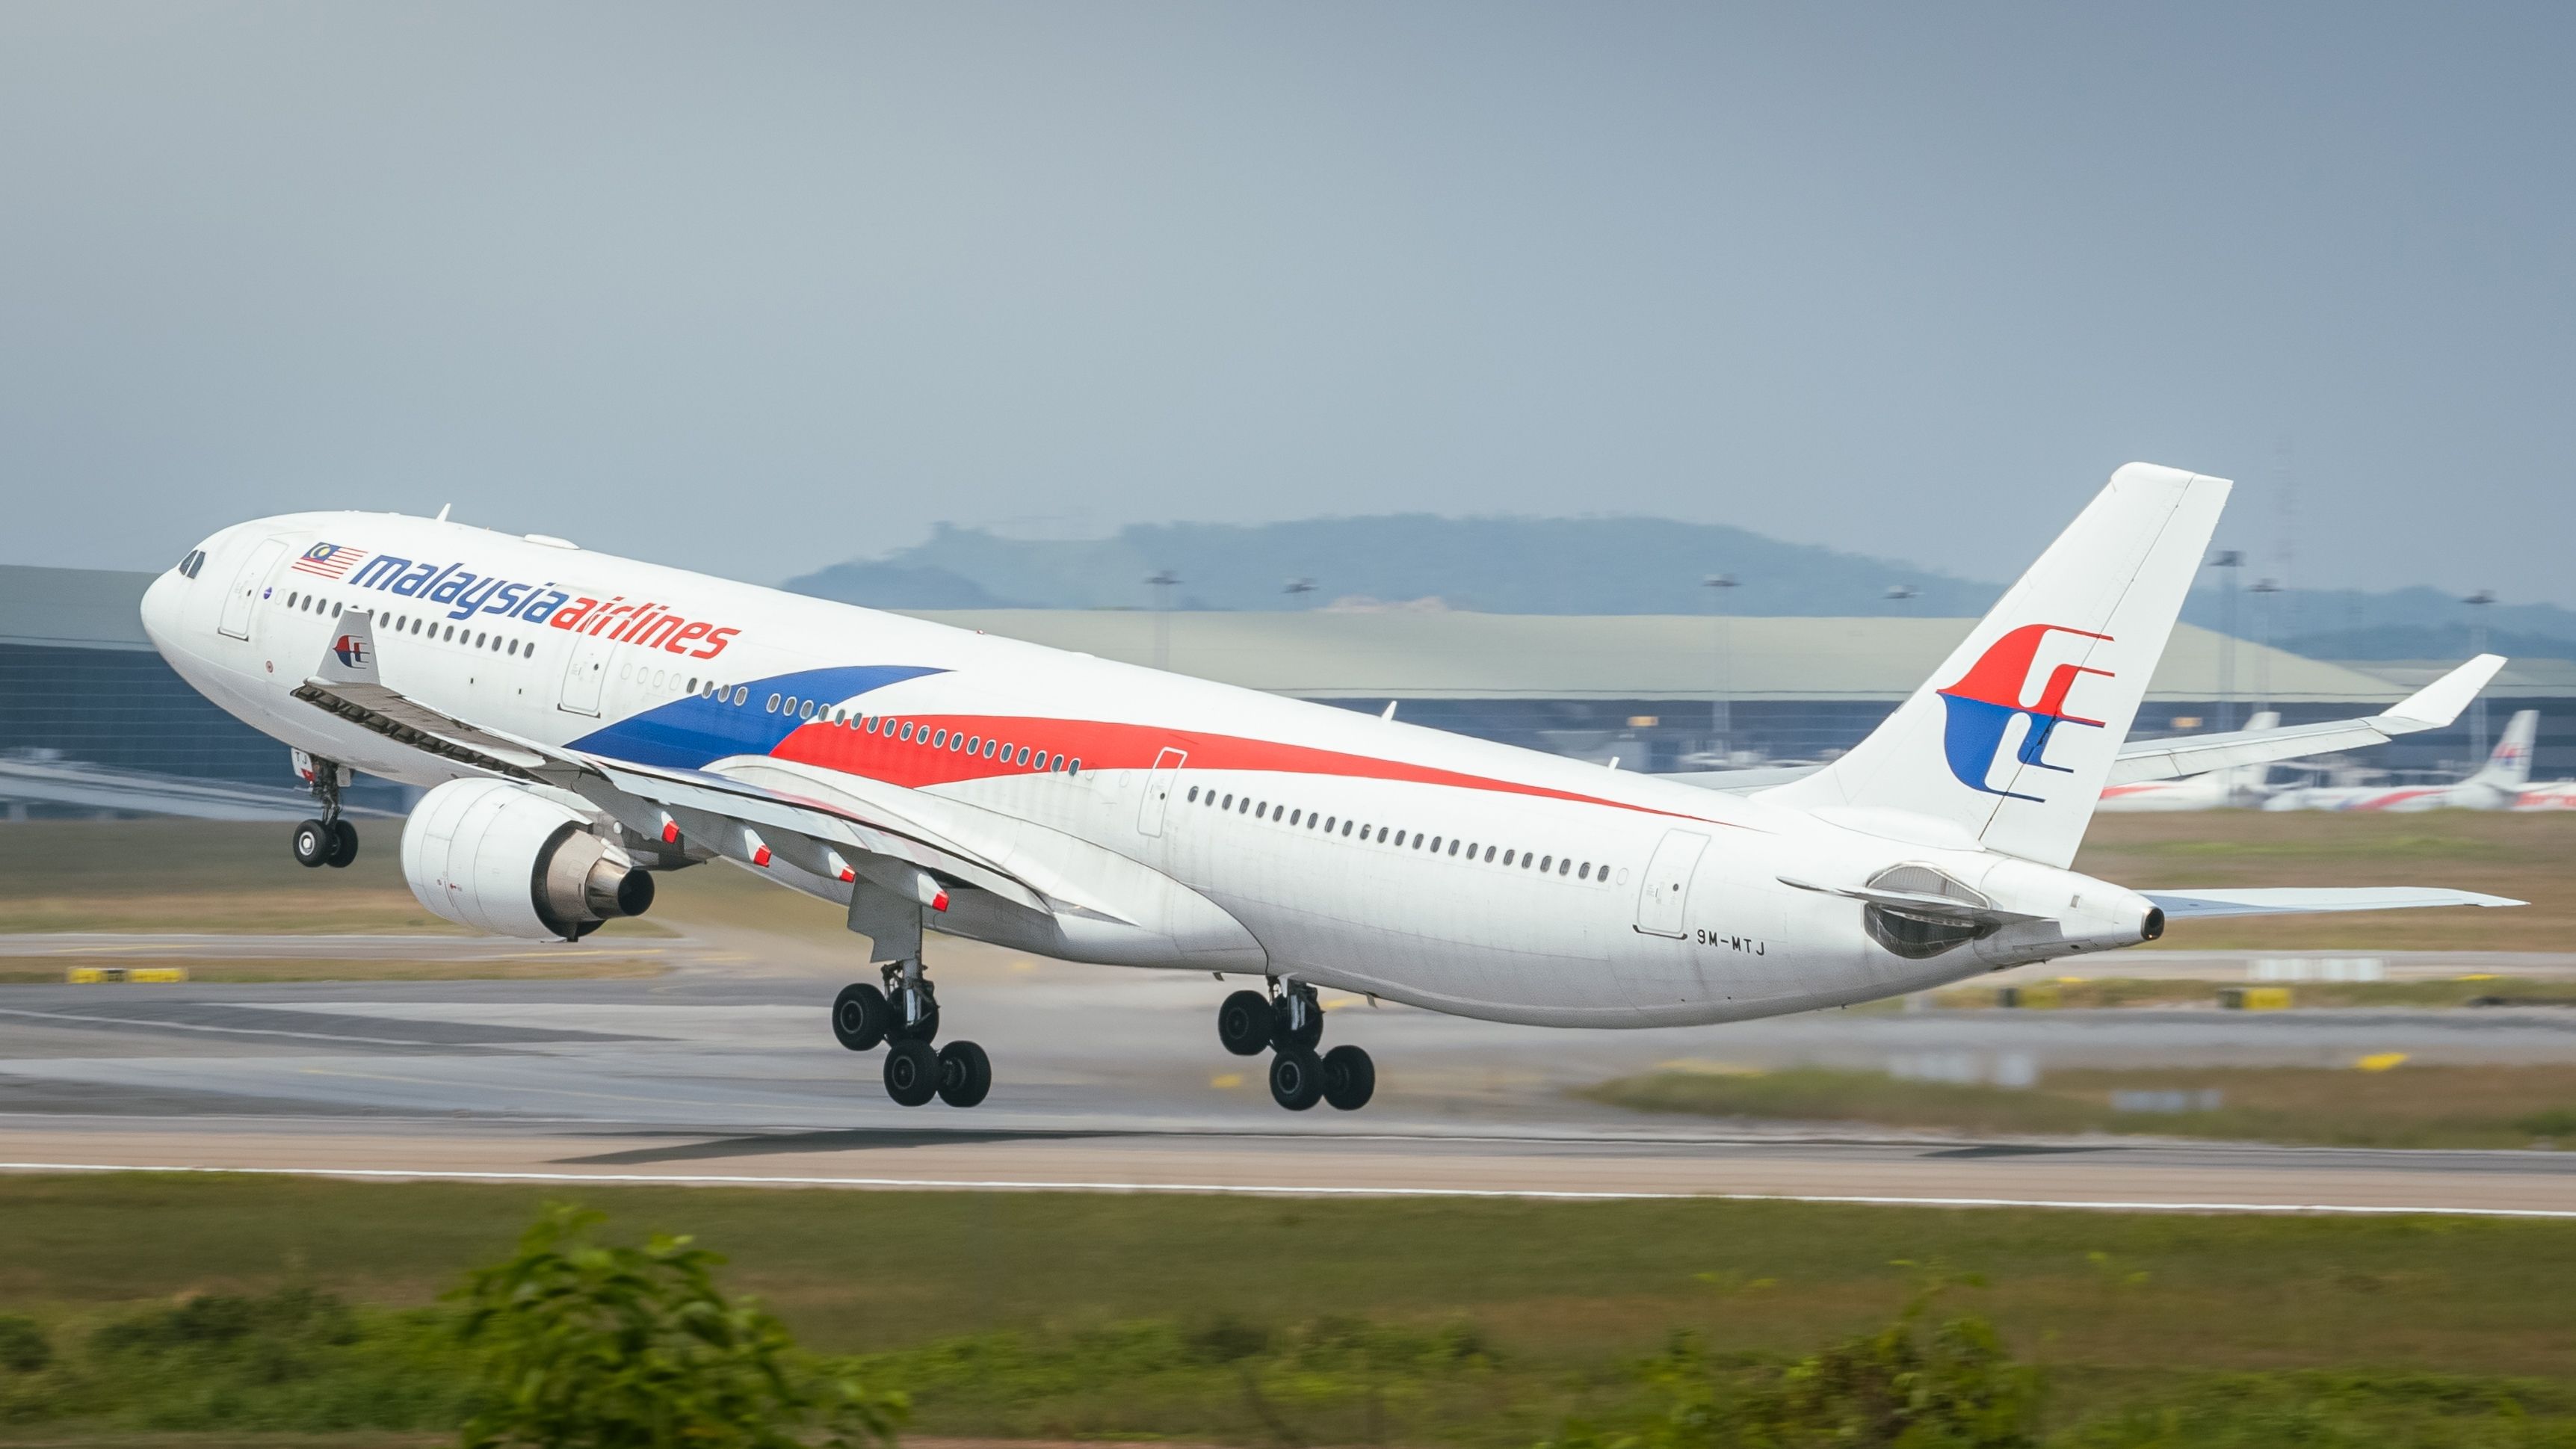 Malaysia Airlines Airbus A330 taking off. 